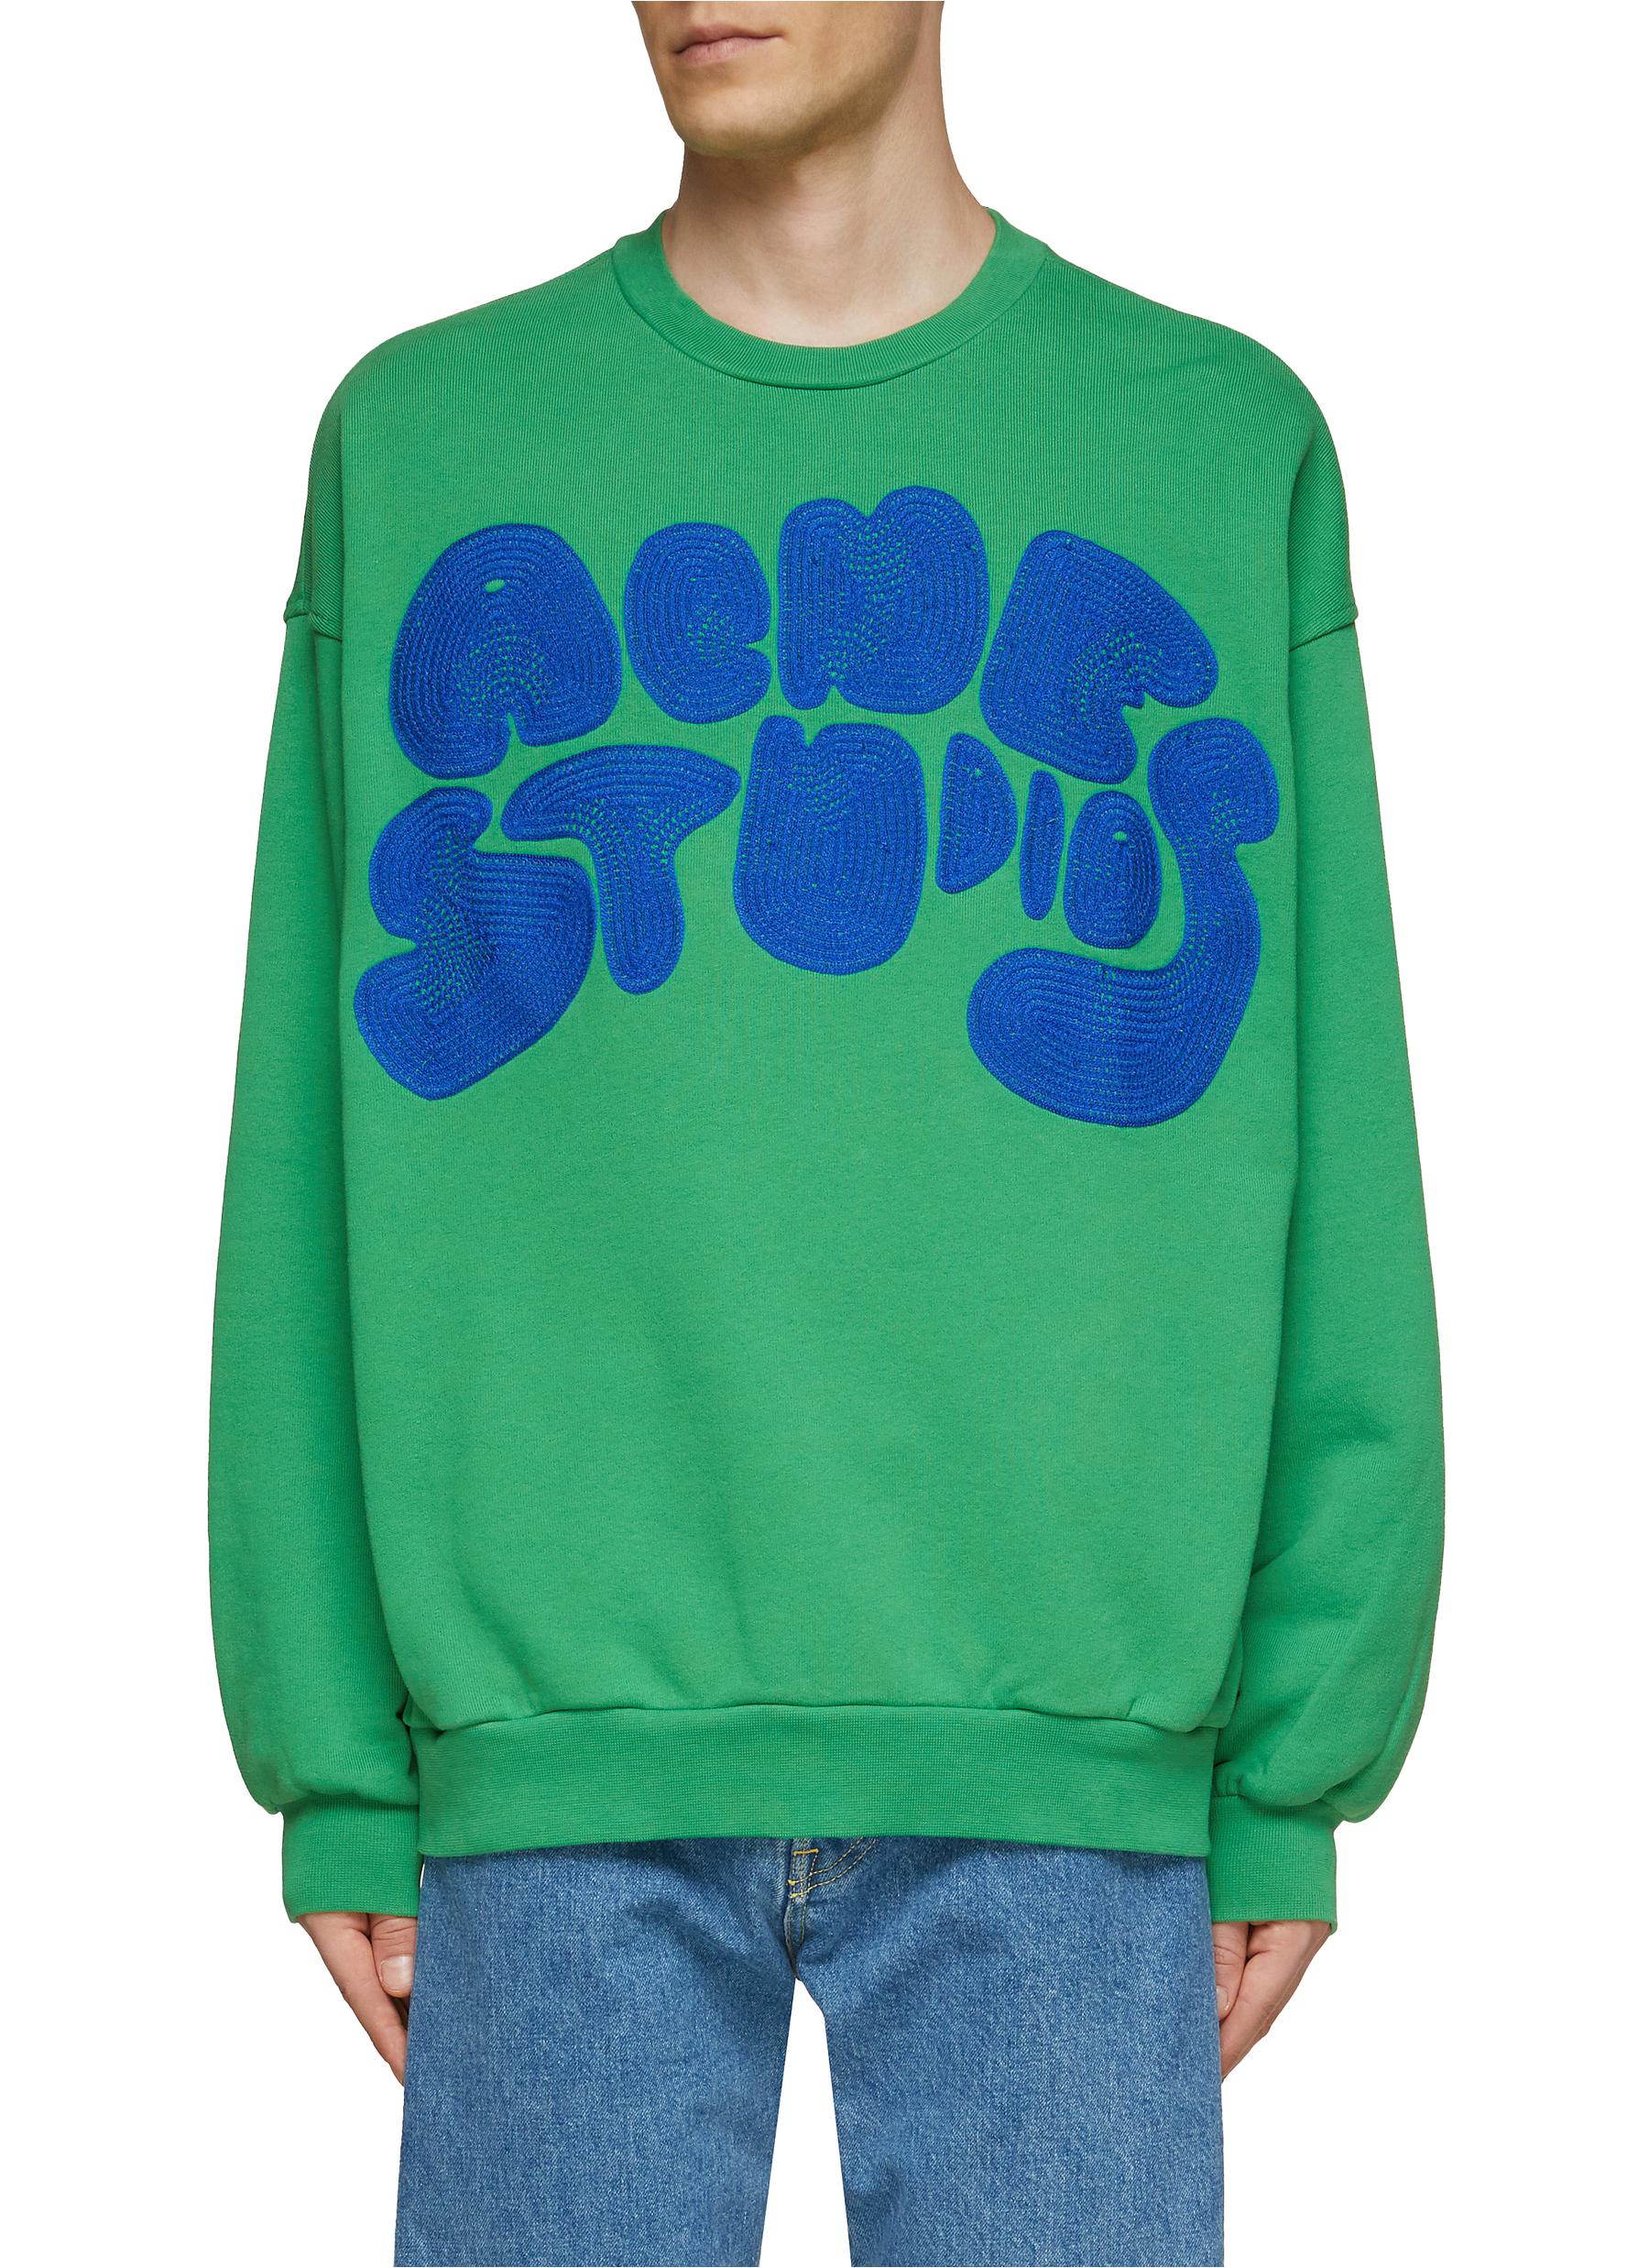 ACNE STUDIOS EMBROIDERY CHEST LOGO RELAXED FIT SWEATSHIRT